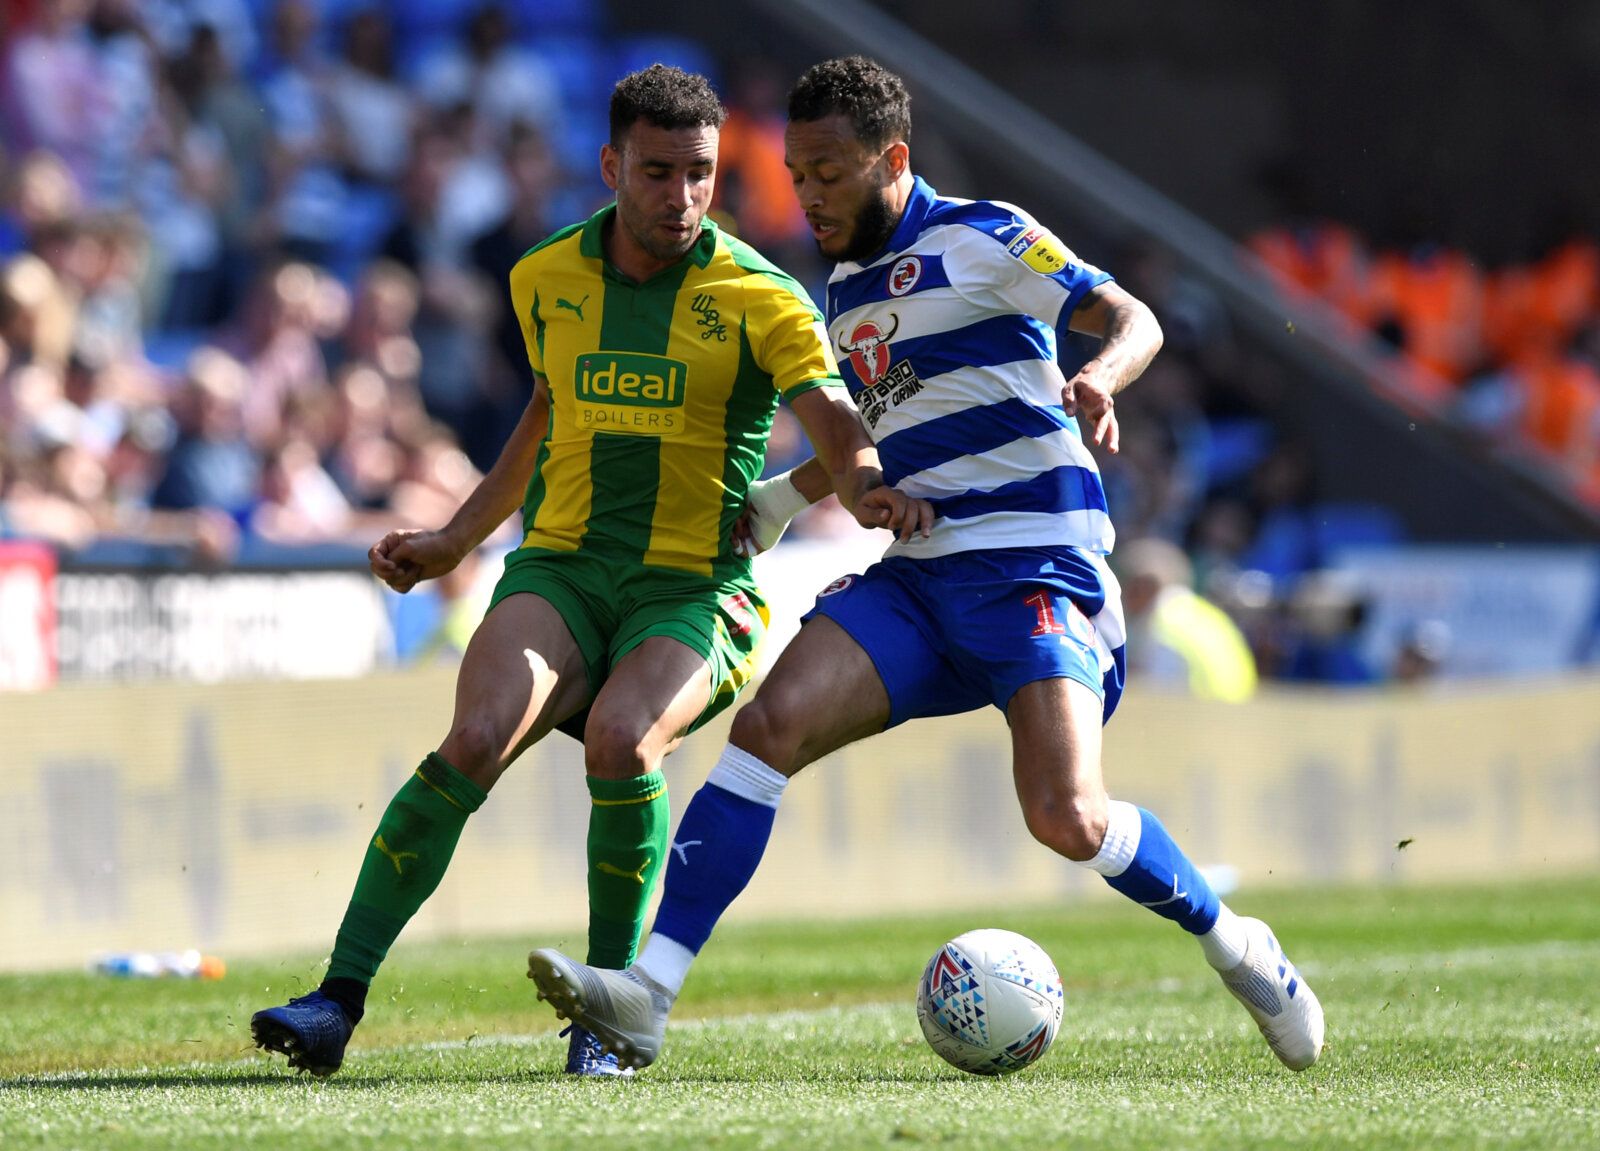 Soccer Football - Championship - Reading v West Bromwich Albion - Madejski Stadium, Reading, Britain - April 22, 2019  Reading's Lewis Baker in action with WBA's Hal Robson-Kanu  Action Images/Tony O'Brien  EDITORIAL USE ONLY. No use with unauthorized audio, video, data, fixture lists, club/league logos or 